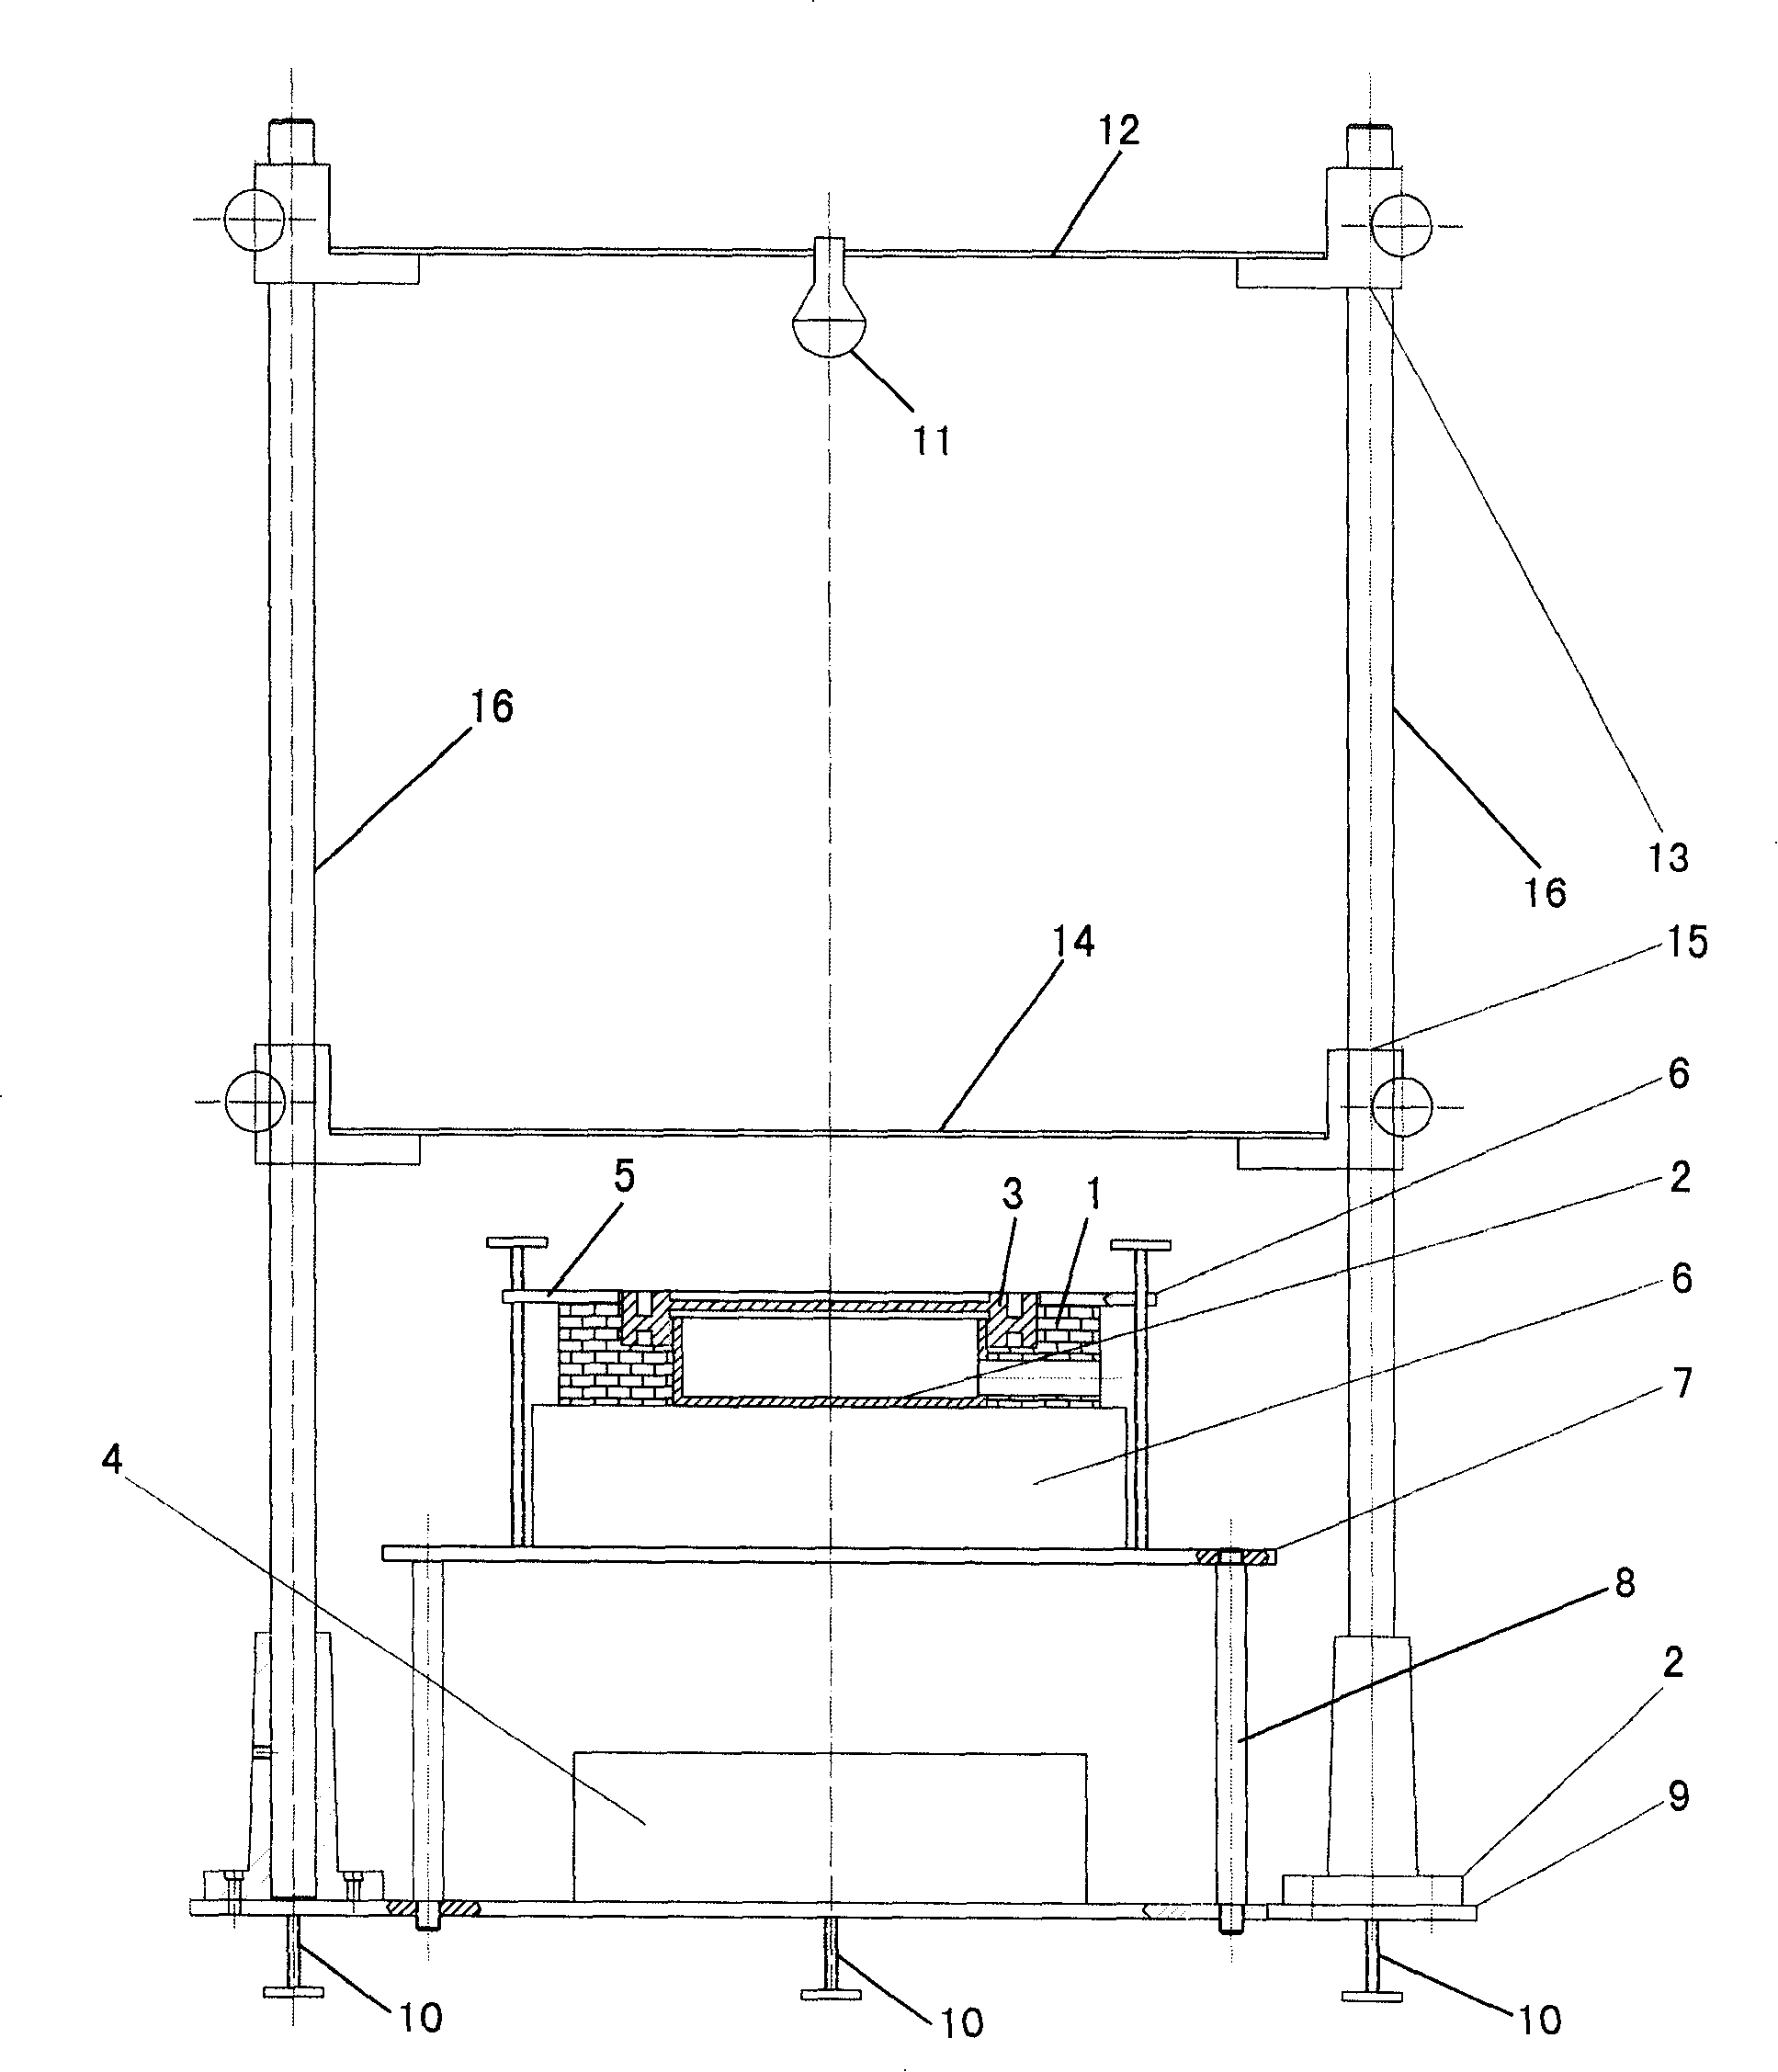 Measuring apparatus for fabric dynamic heat and moisture transmission characteristic